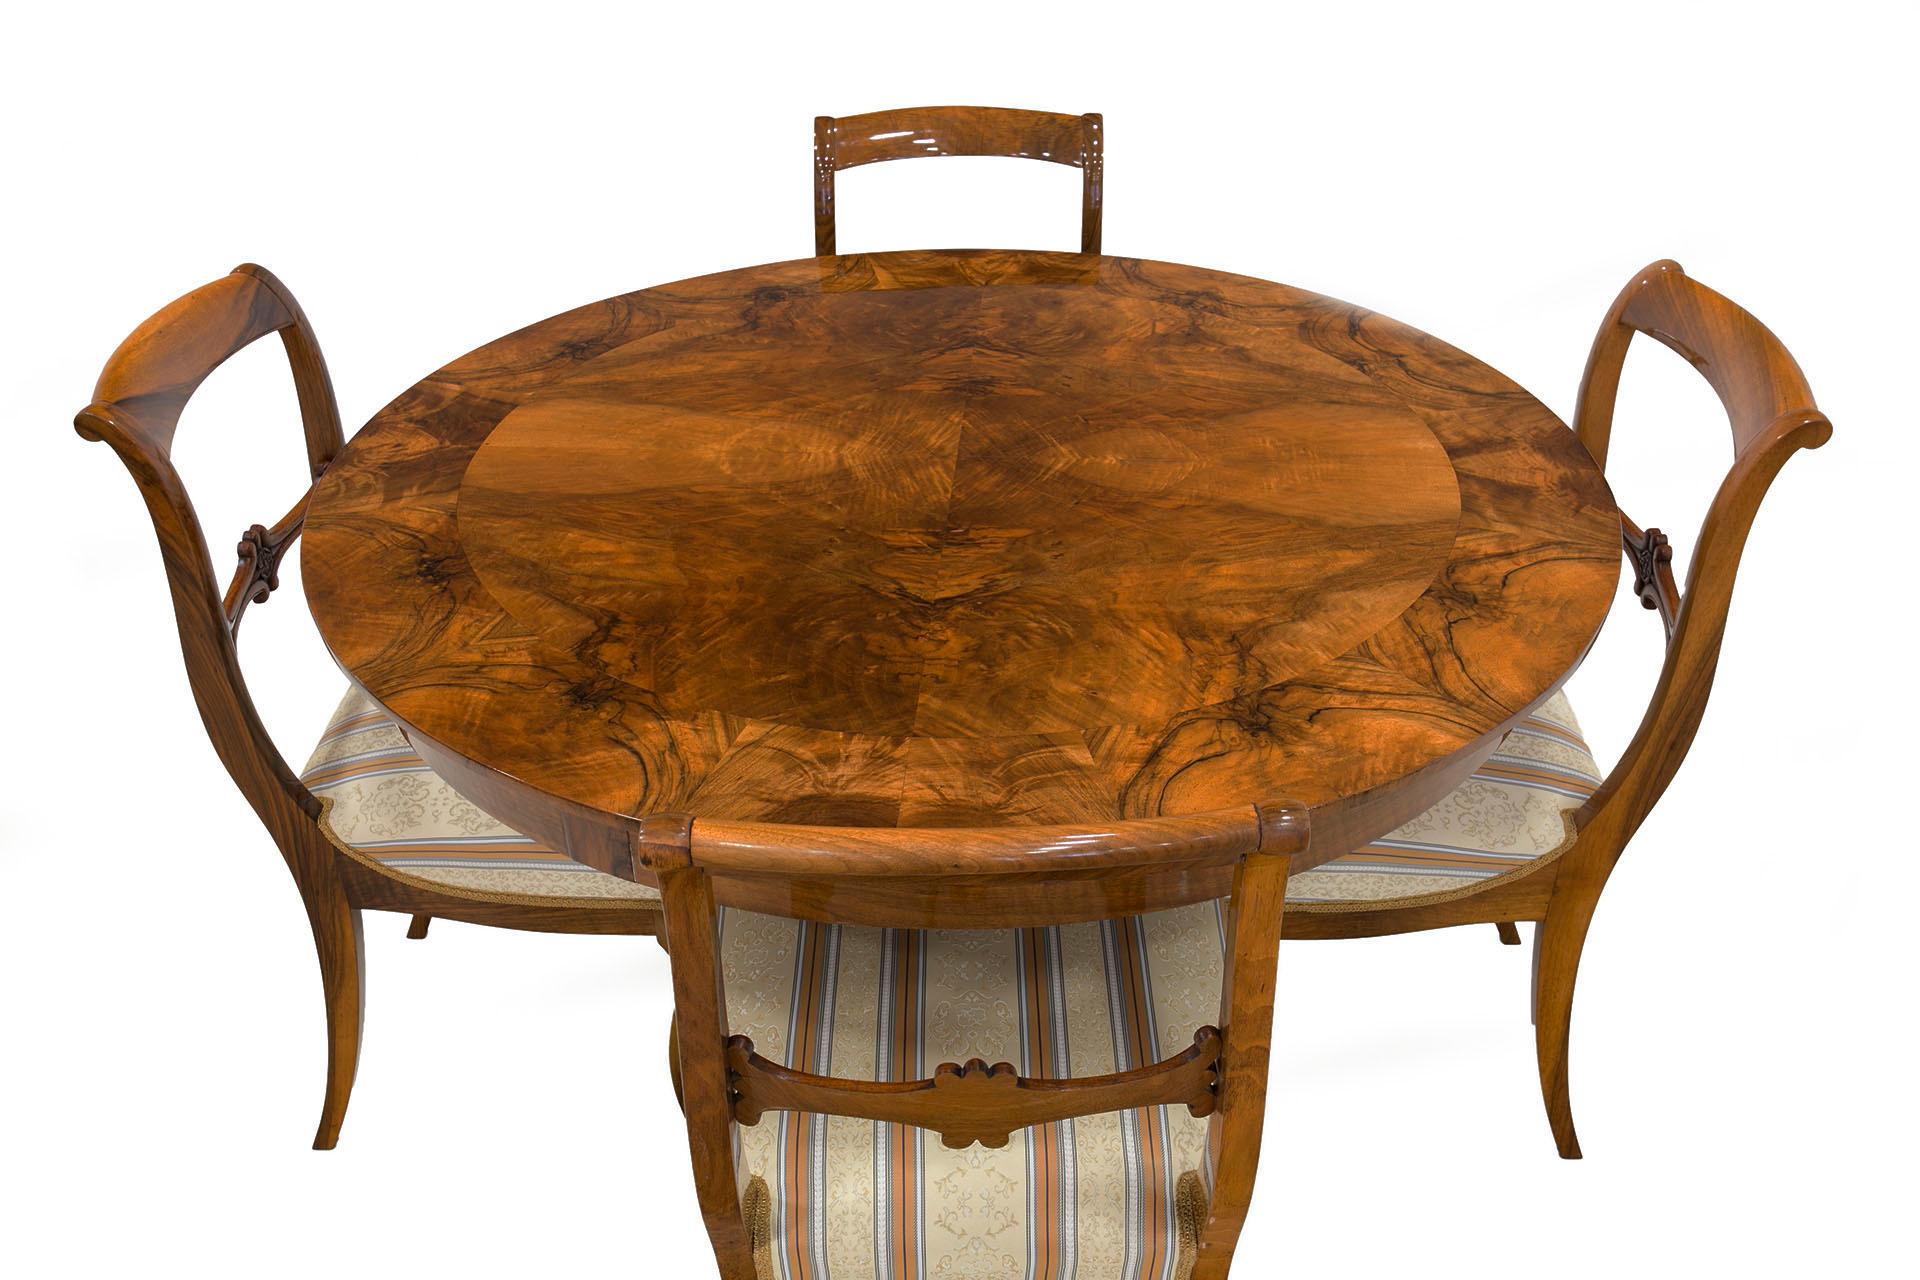 This beautiful dining room set is made of walnut wood and come from Germany from around first half of the 19th century. The round shape of the table allows comfortable and easy use. Chairs are after complete renovation. The surface of table and